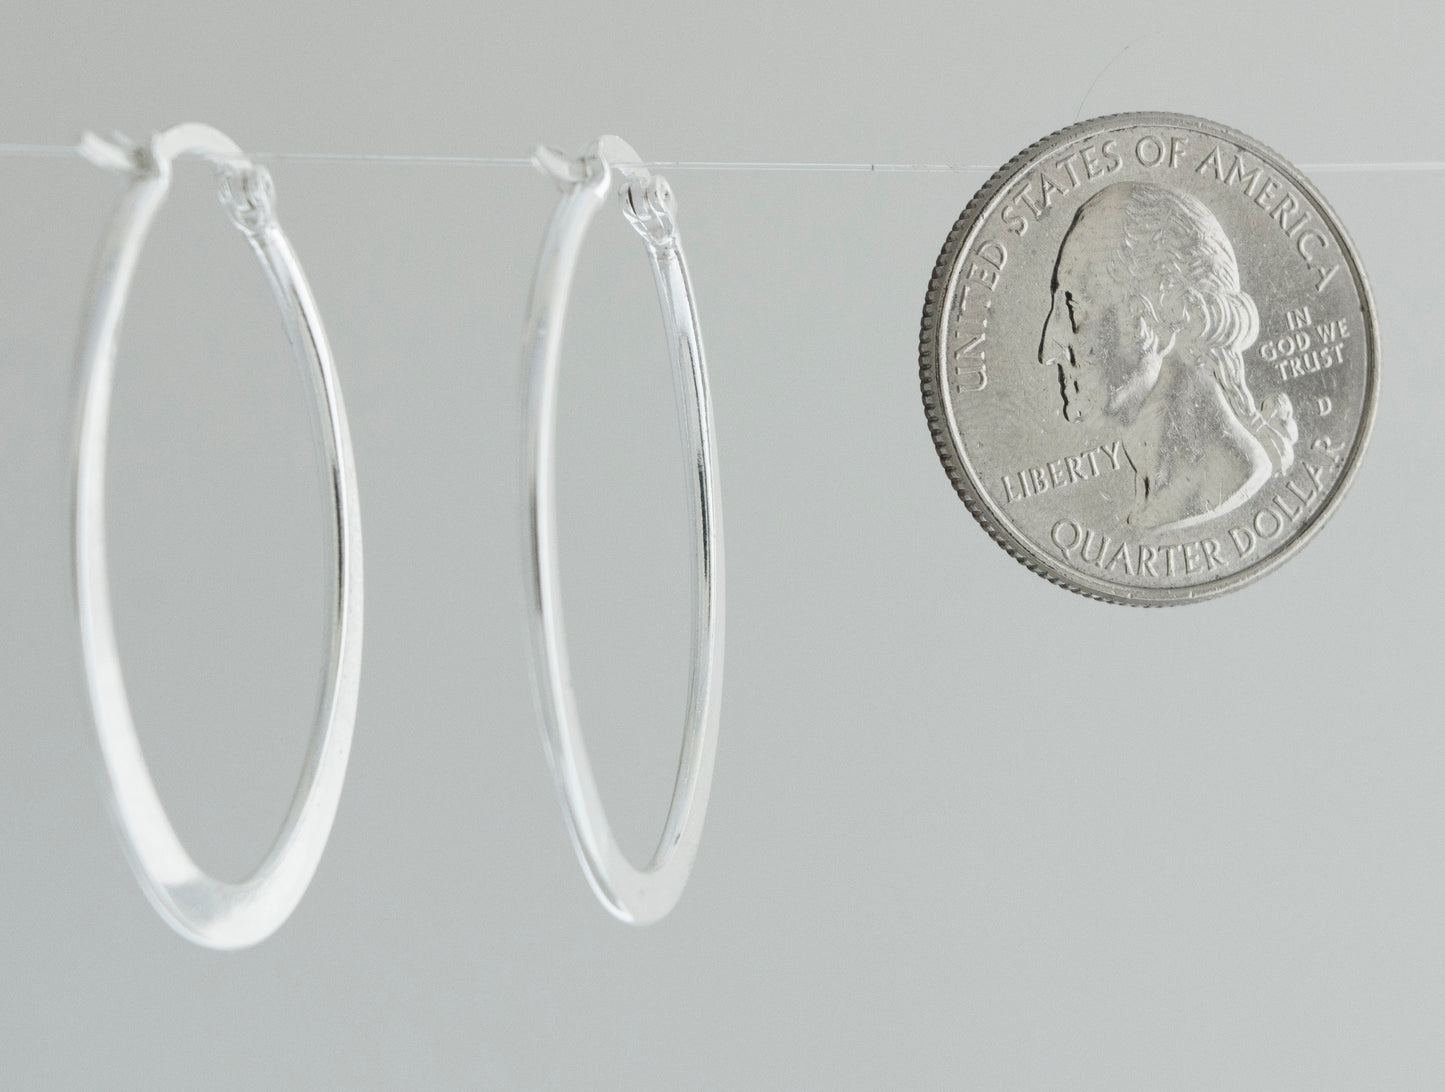 A minimalist Oval Shaped Hoops and coin earrings handcrafted from sterling silver by Super Silver.